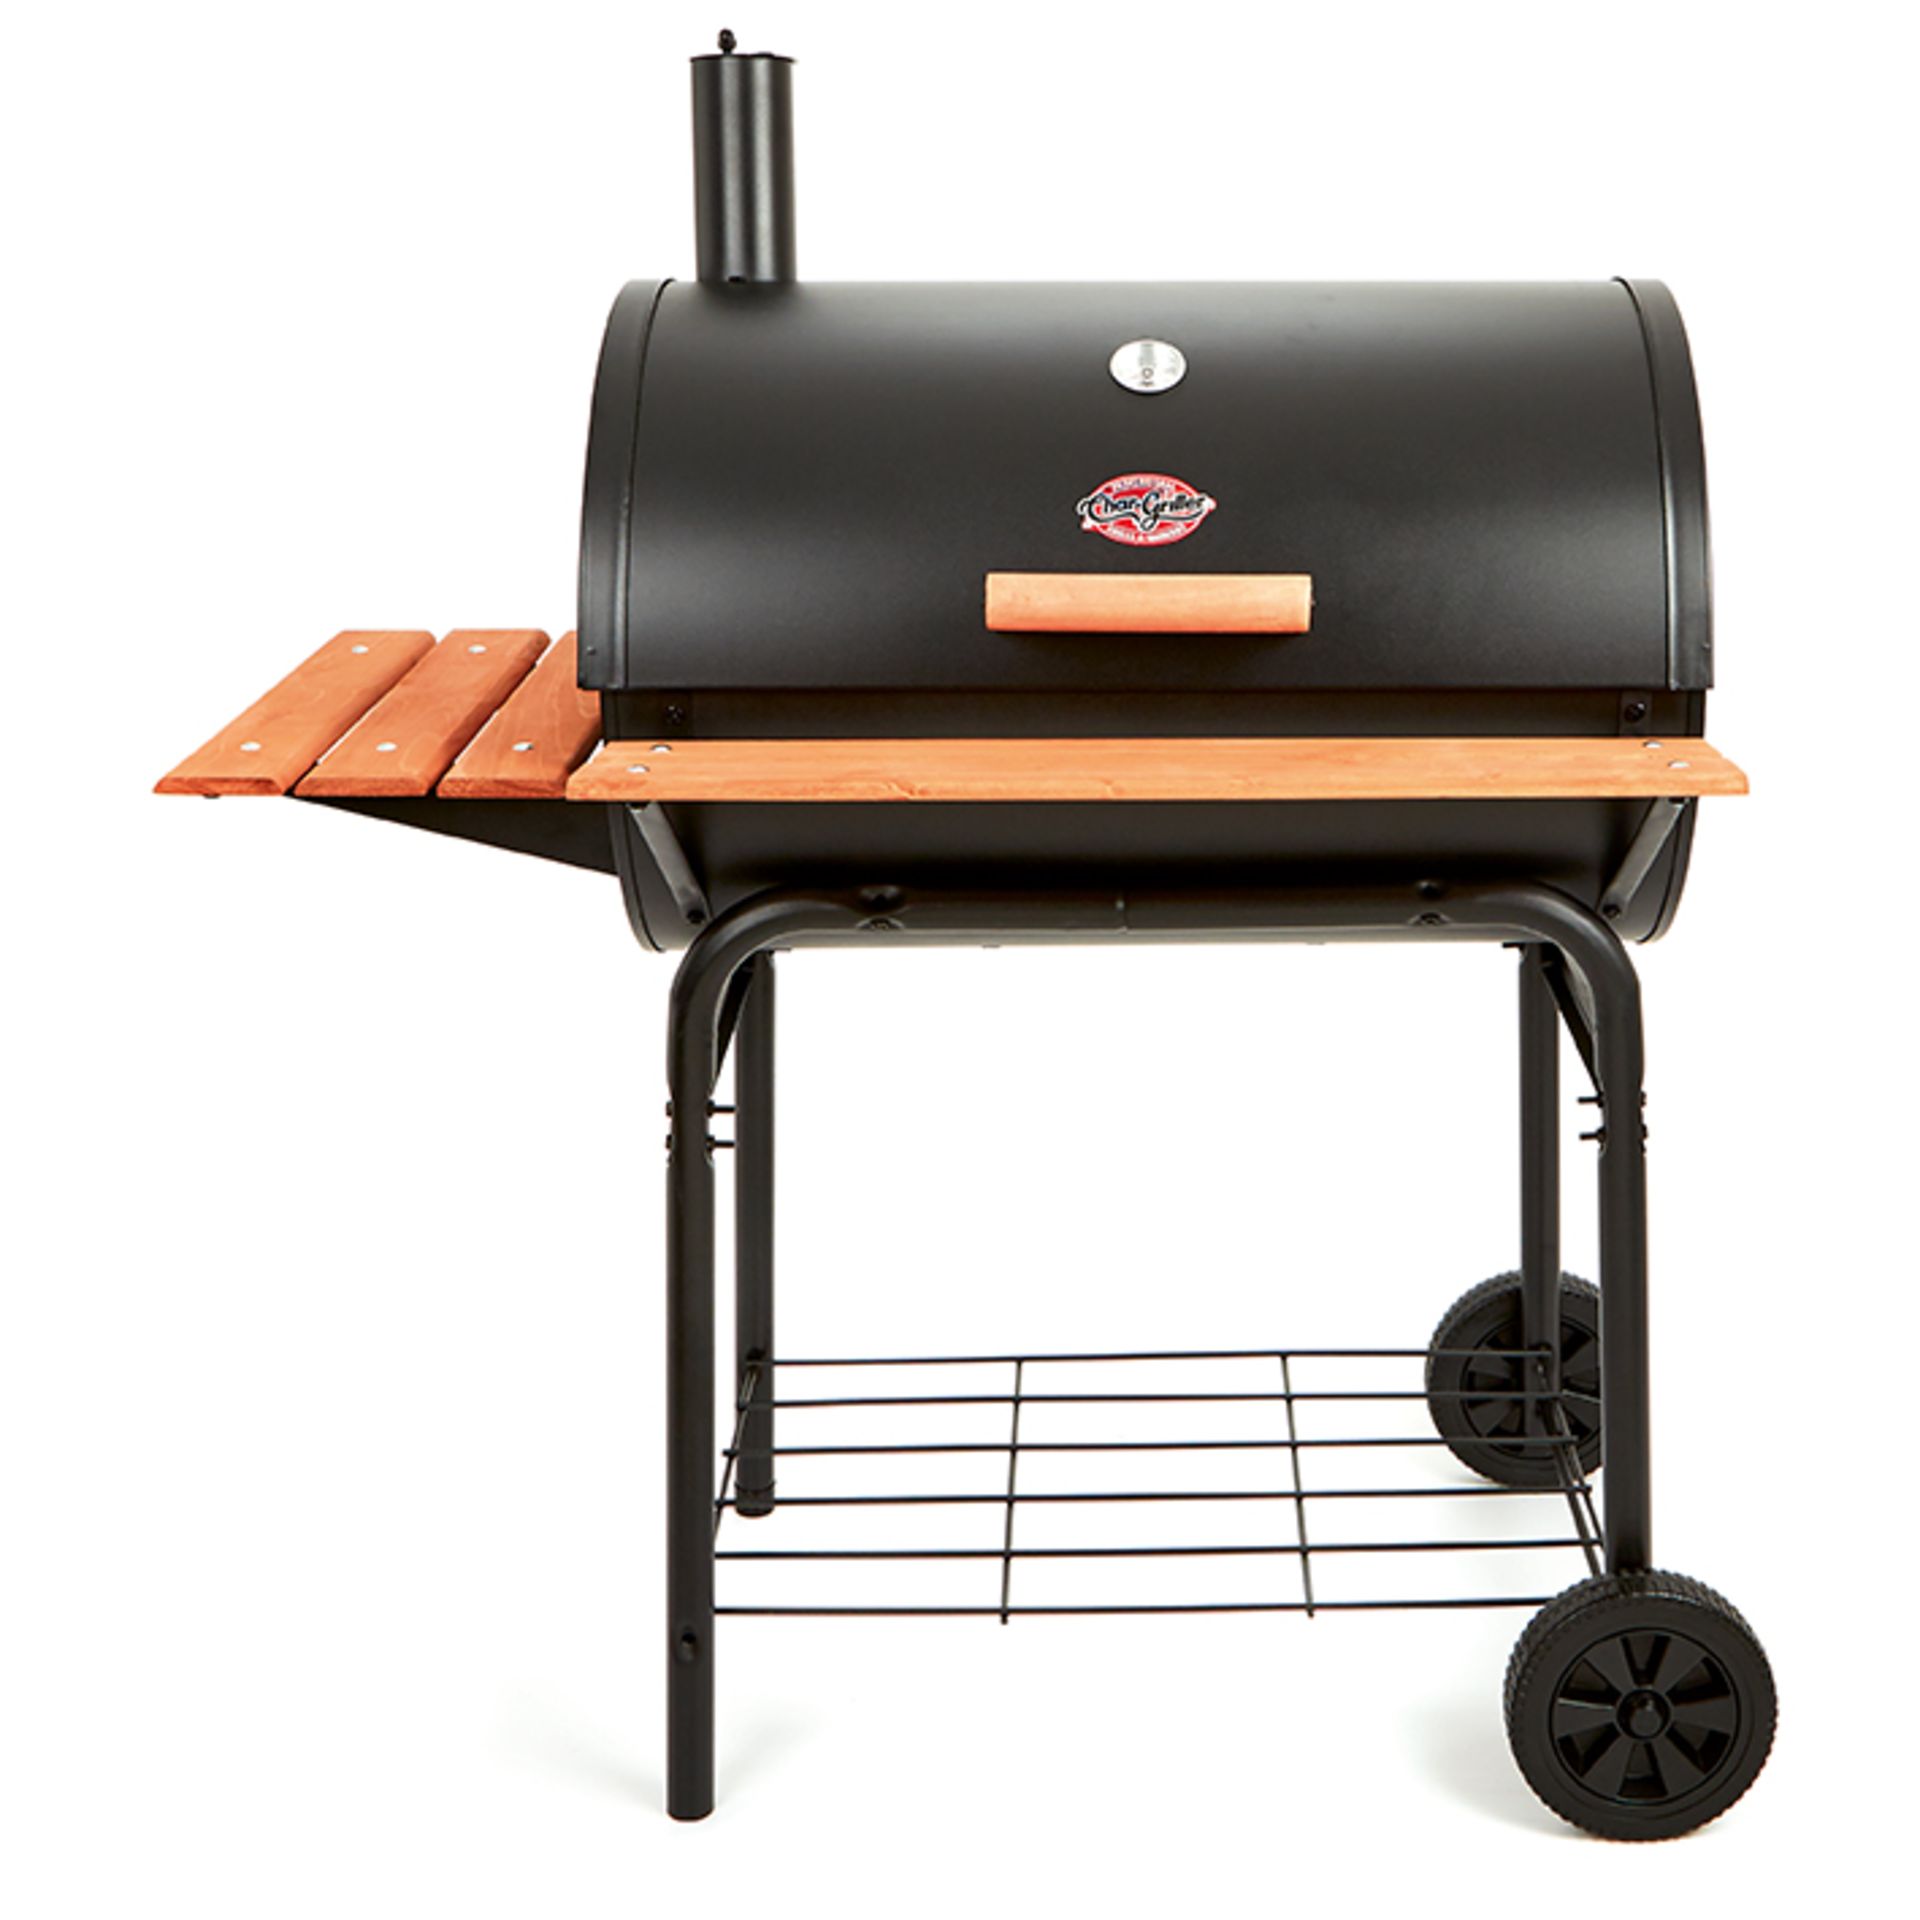 CHARCOAL GRILL PRO BLACK PATIO OUTDOOR GARDEN XL COOKING DELUXE AIR NEW CHAR BBQ - Image 2 of 4